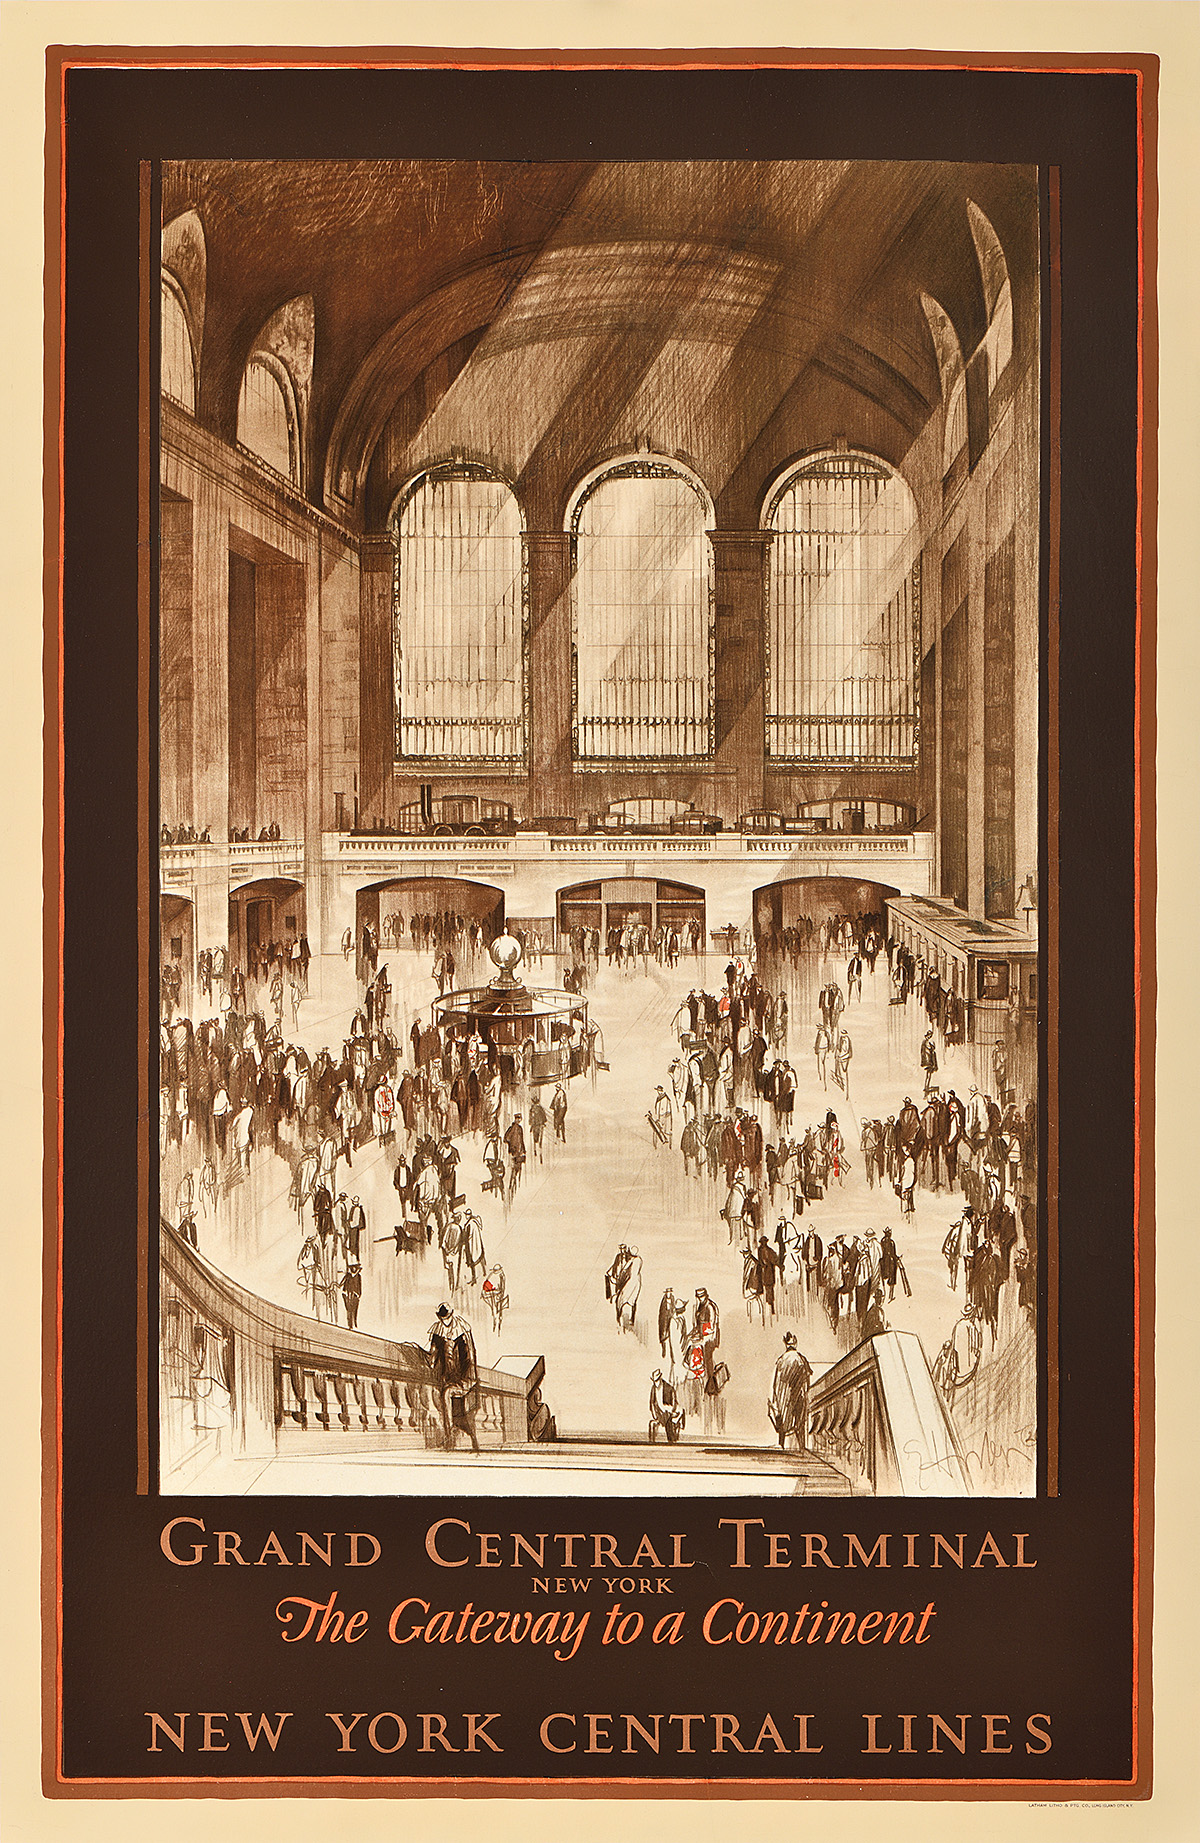 A sepia-toned poster of Grand Central Station: a large open area with arched windows and entryways.